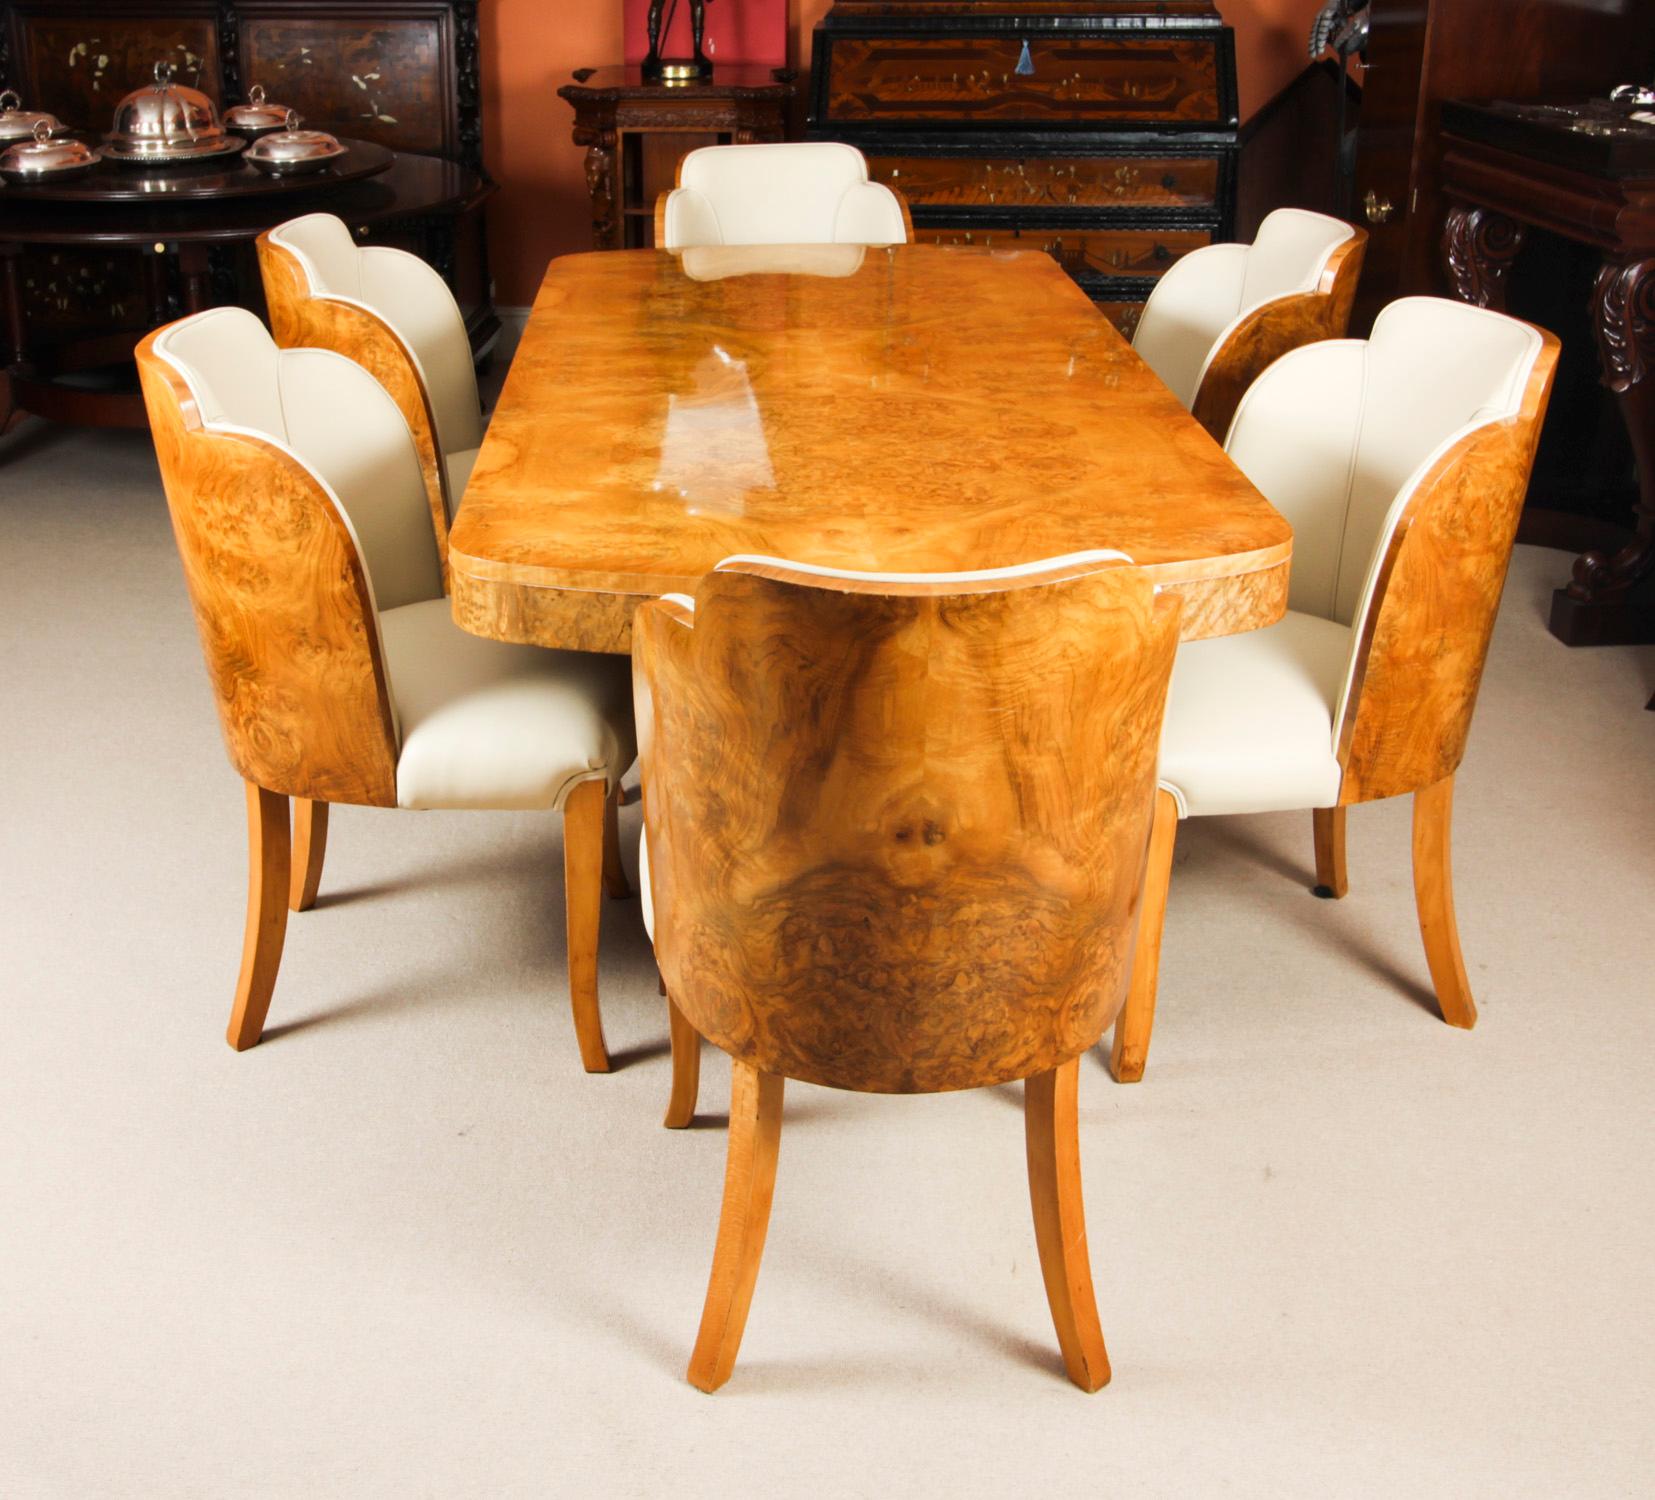 A truly stunning antique Art Deco burr walnut dining suite attributed to the world renowned cabinet makers, Harry & Lou Epstein, comprising a dining table and the original matching set of six cloud back dining chairs, circa 1920 in date.
 
The